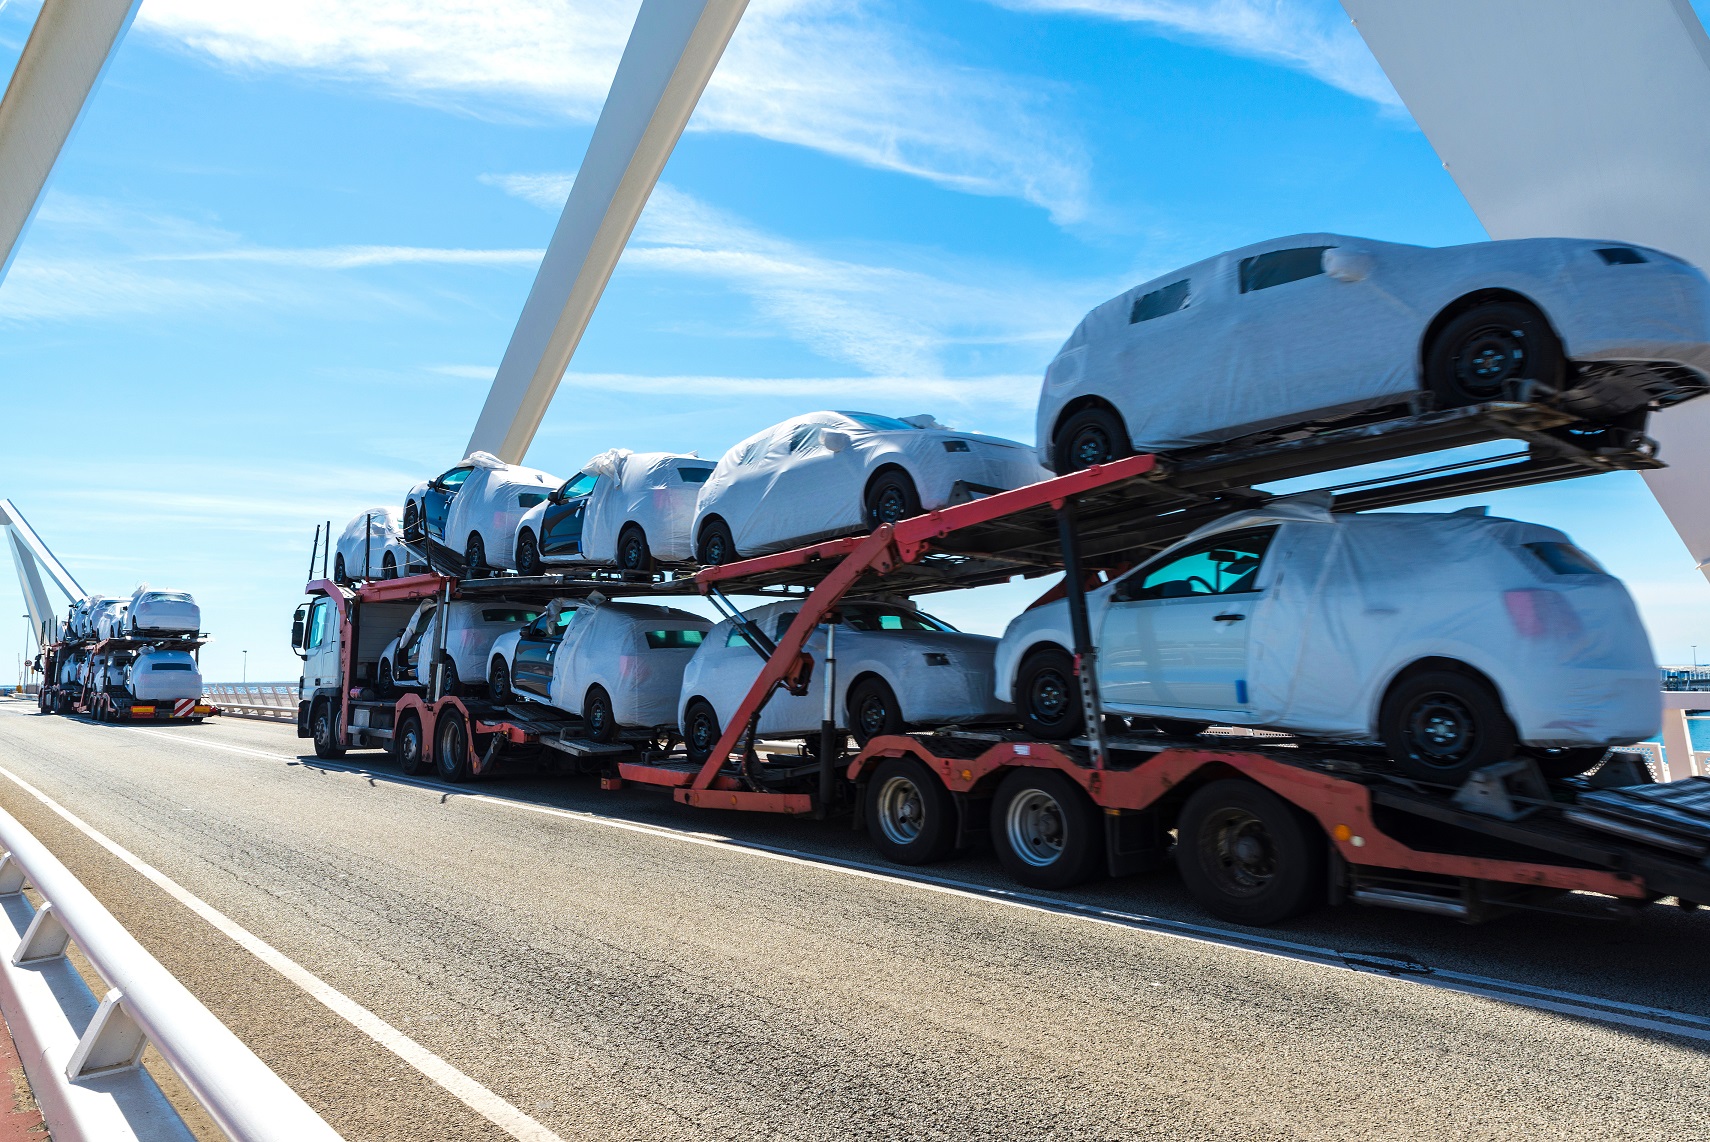 Article Navigating the Road: Choosing the Best Car Transport with Autohauler.com